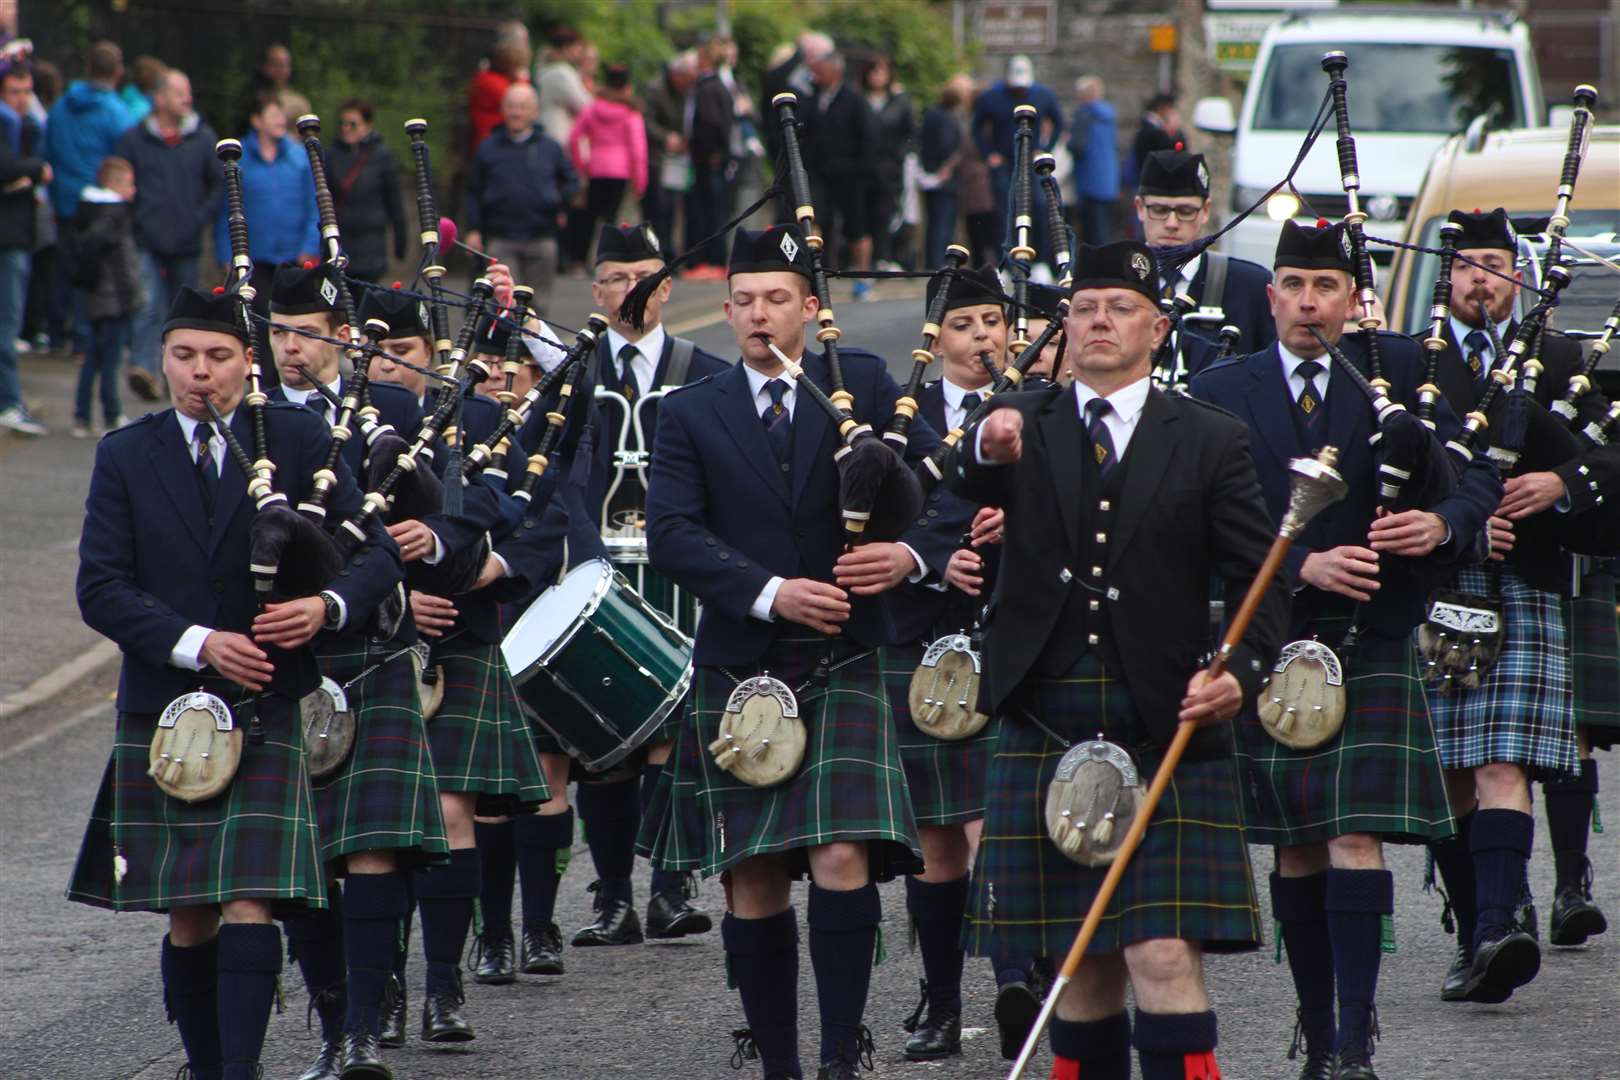 Thurso Pipe Band was awarded £12,000 towards band equipment and uniforms. Picture: Alan Hendry